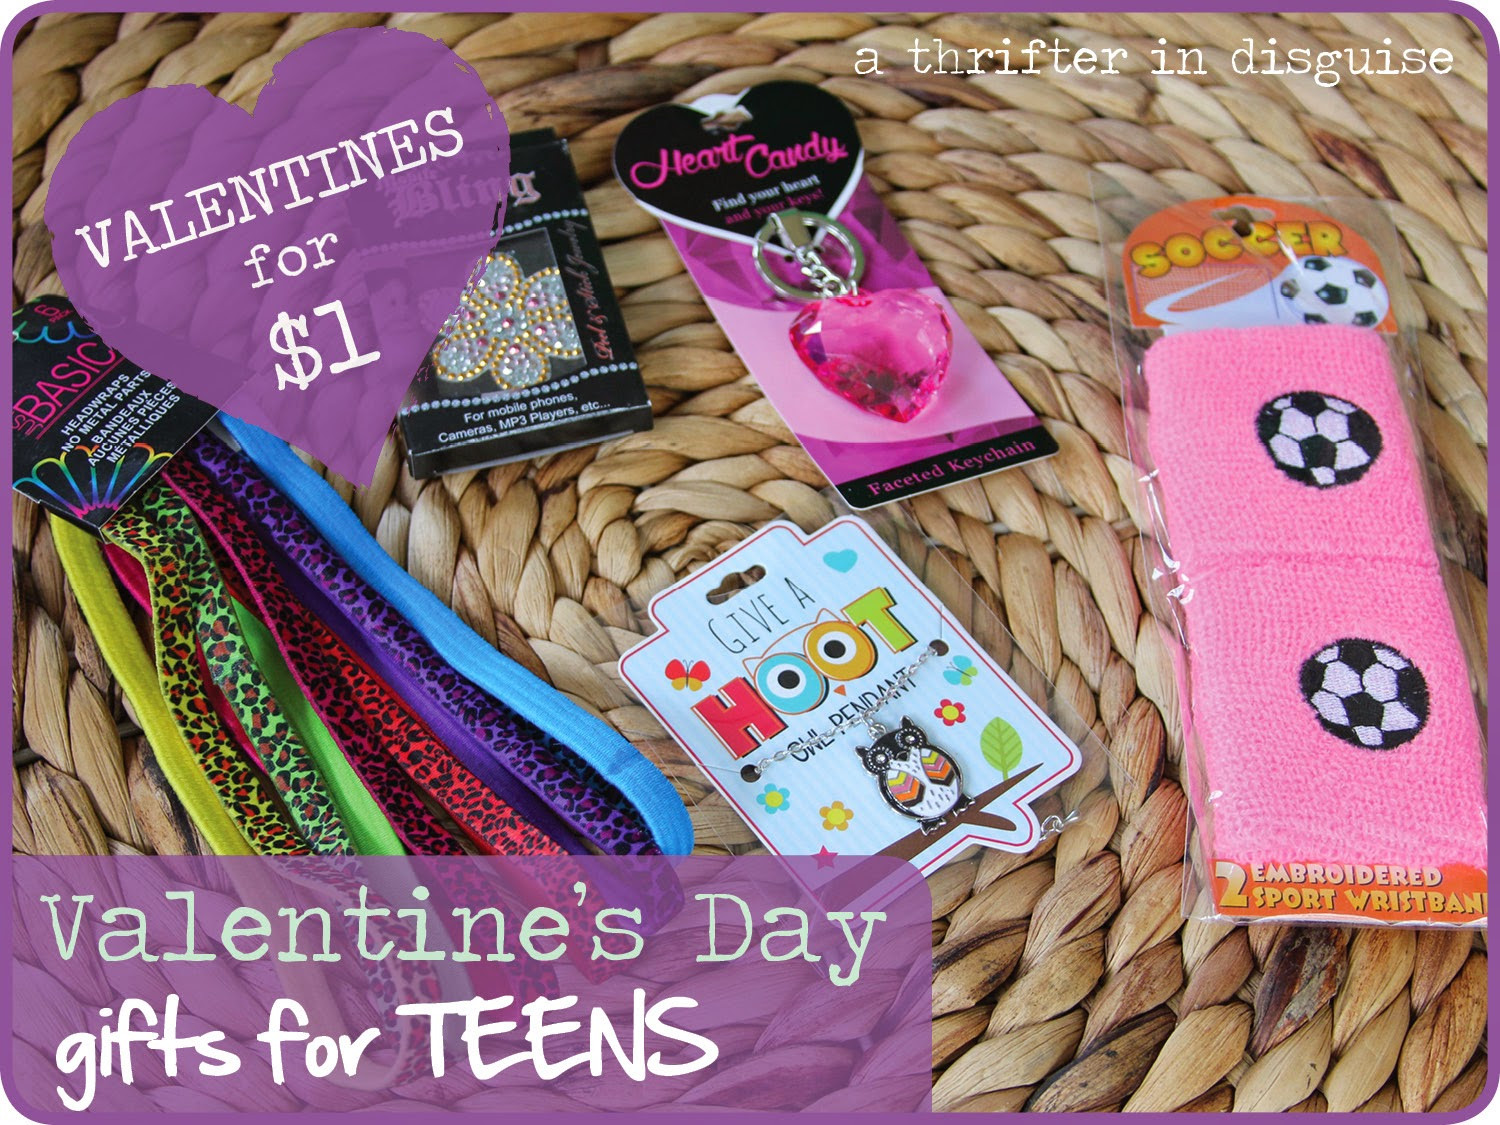 Teenage Valentine Gift Ideas
 A Thrifter in Disguise More $1 Valentine s Day Gifts